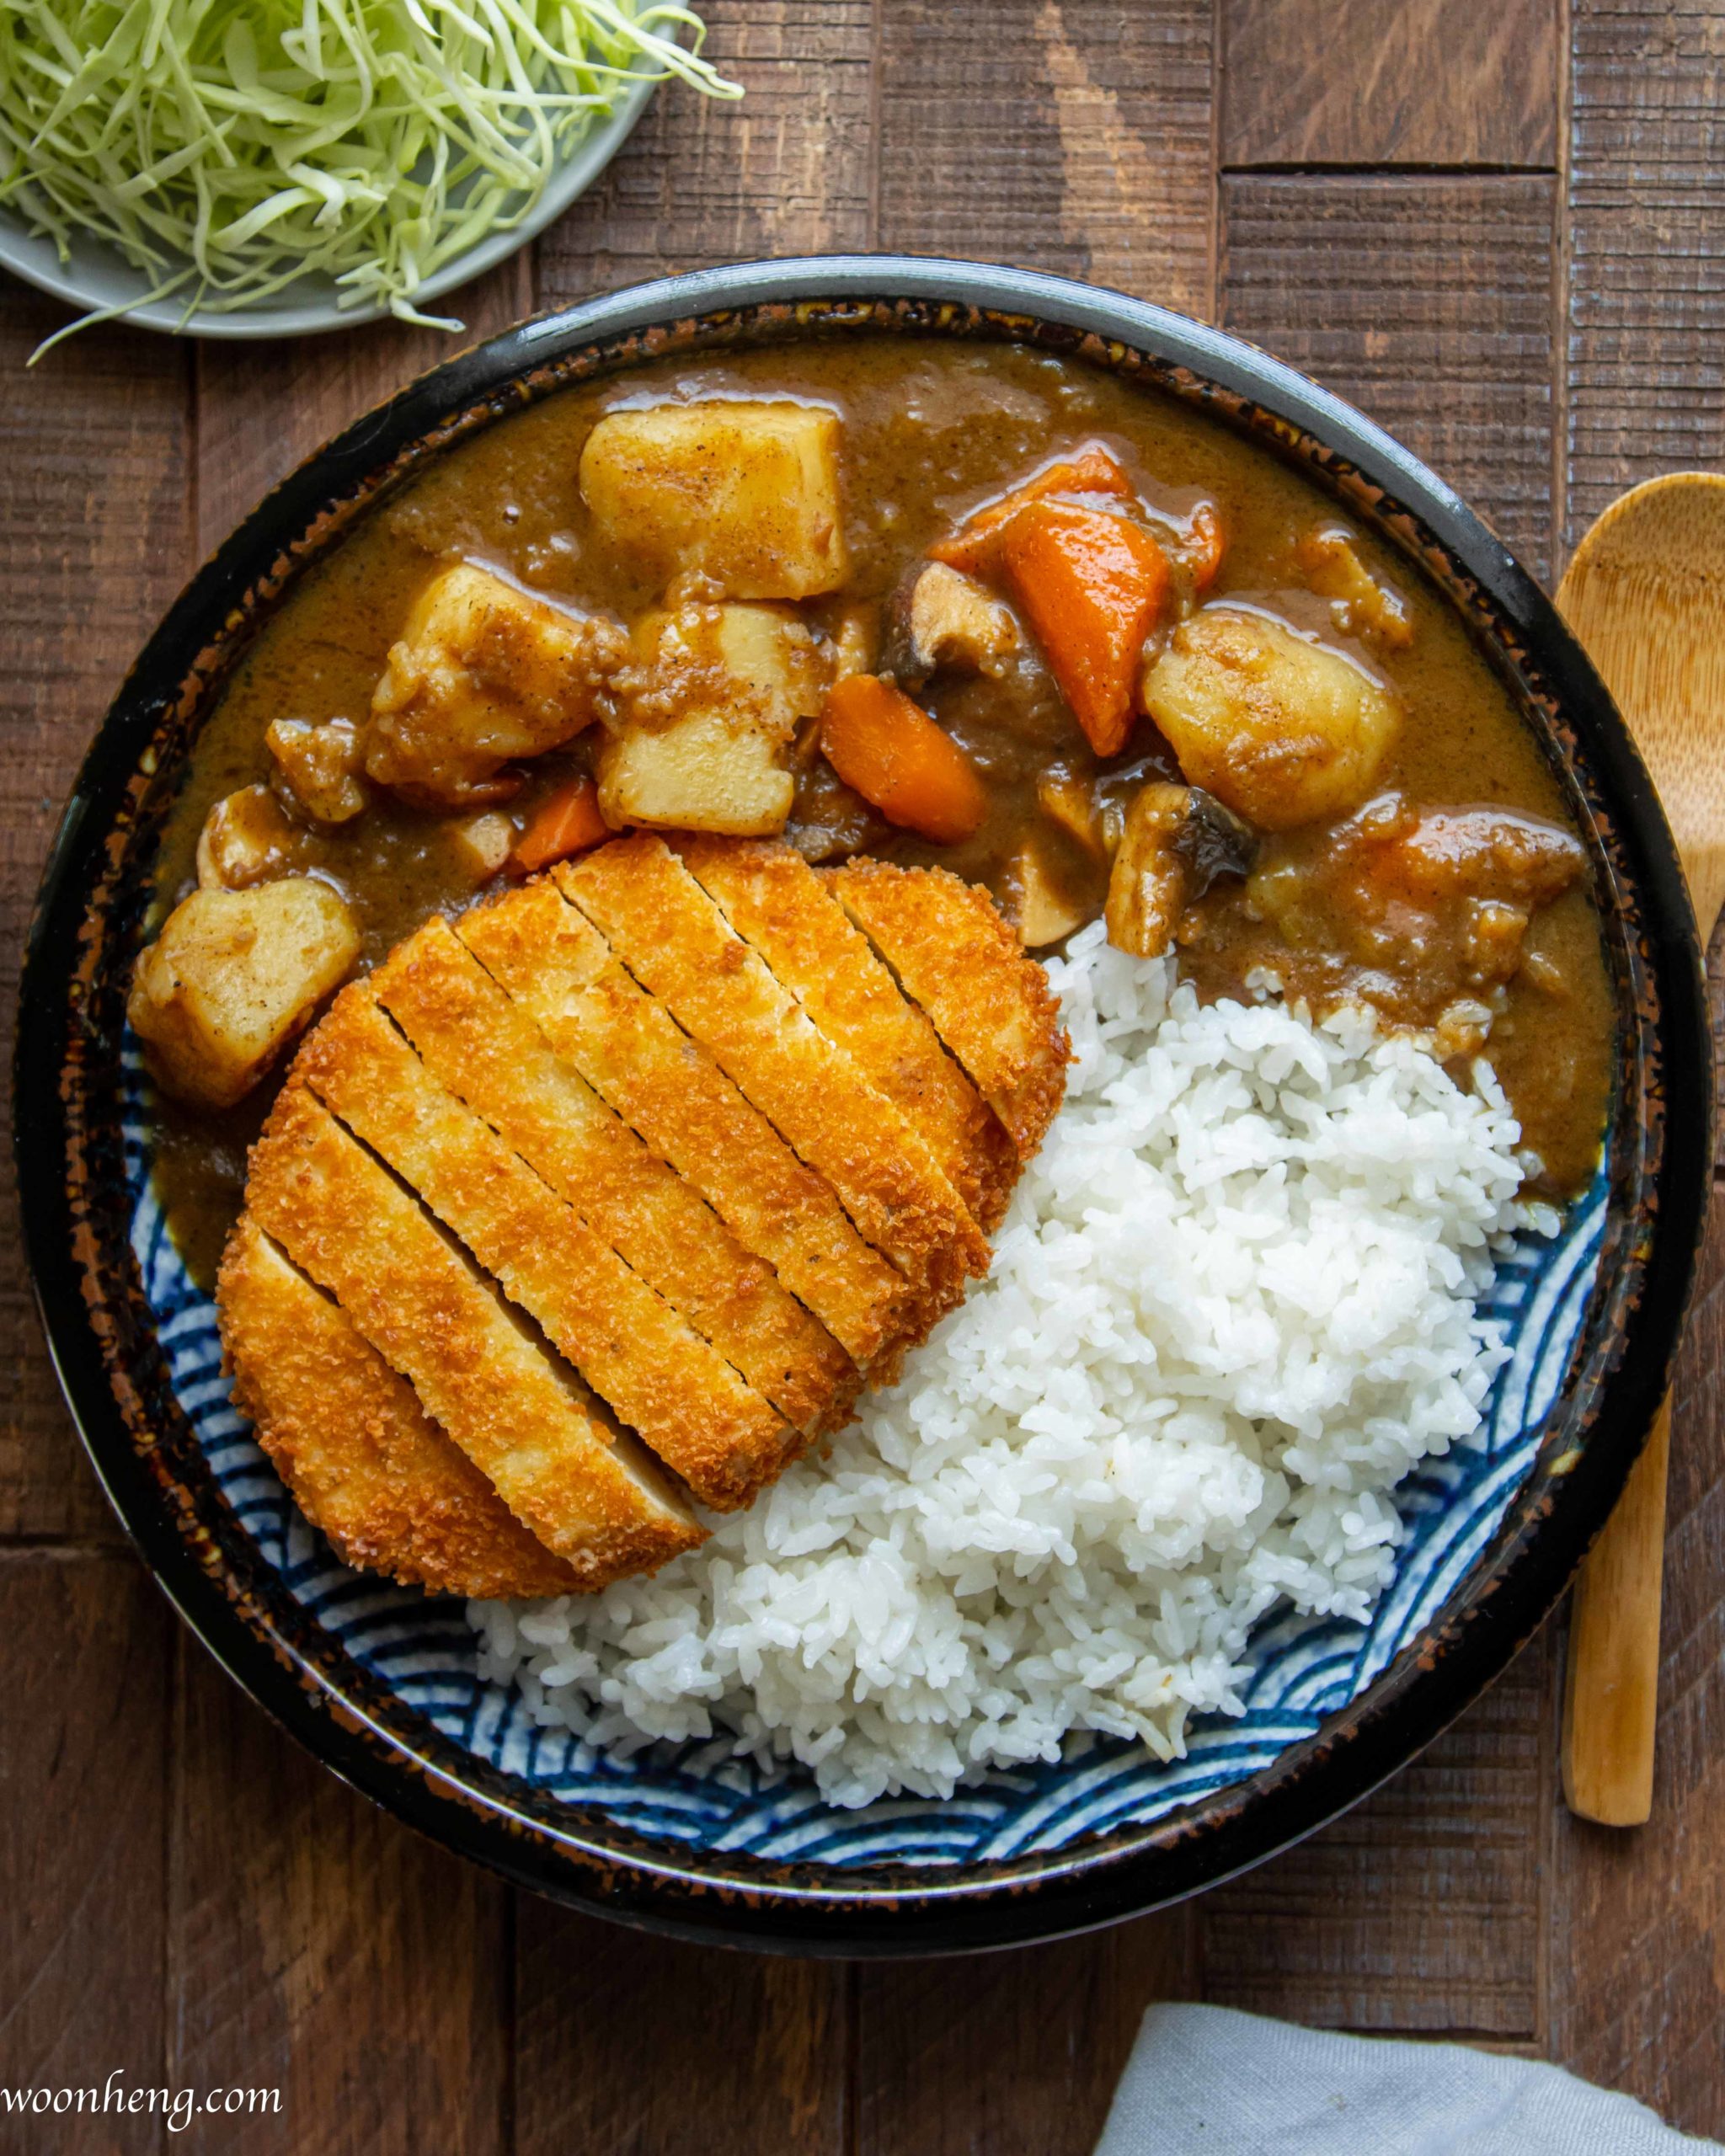 Japanese Curry in the Instant Pot - Easy Healthy Recipes